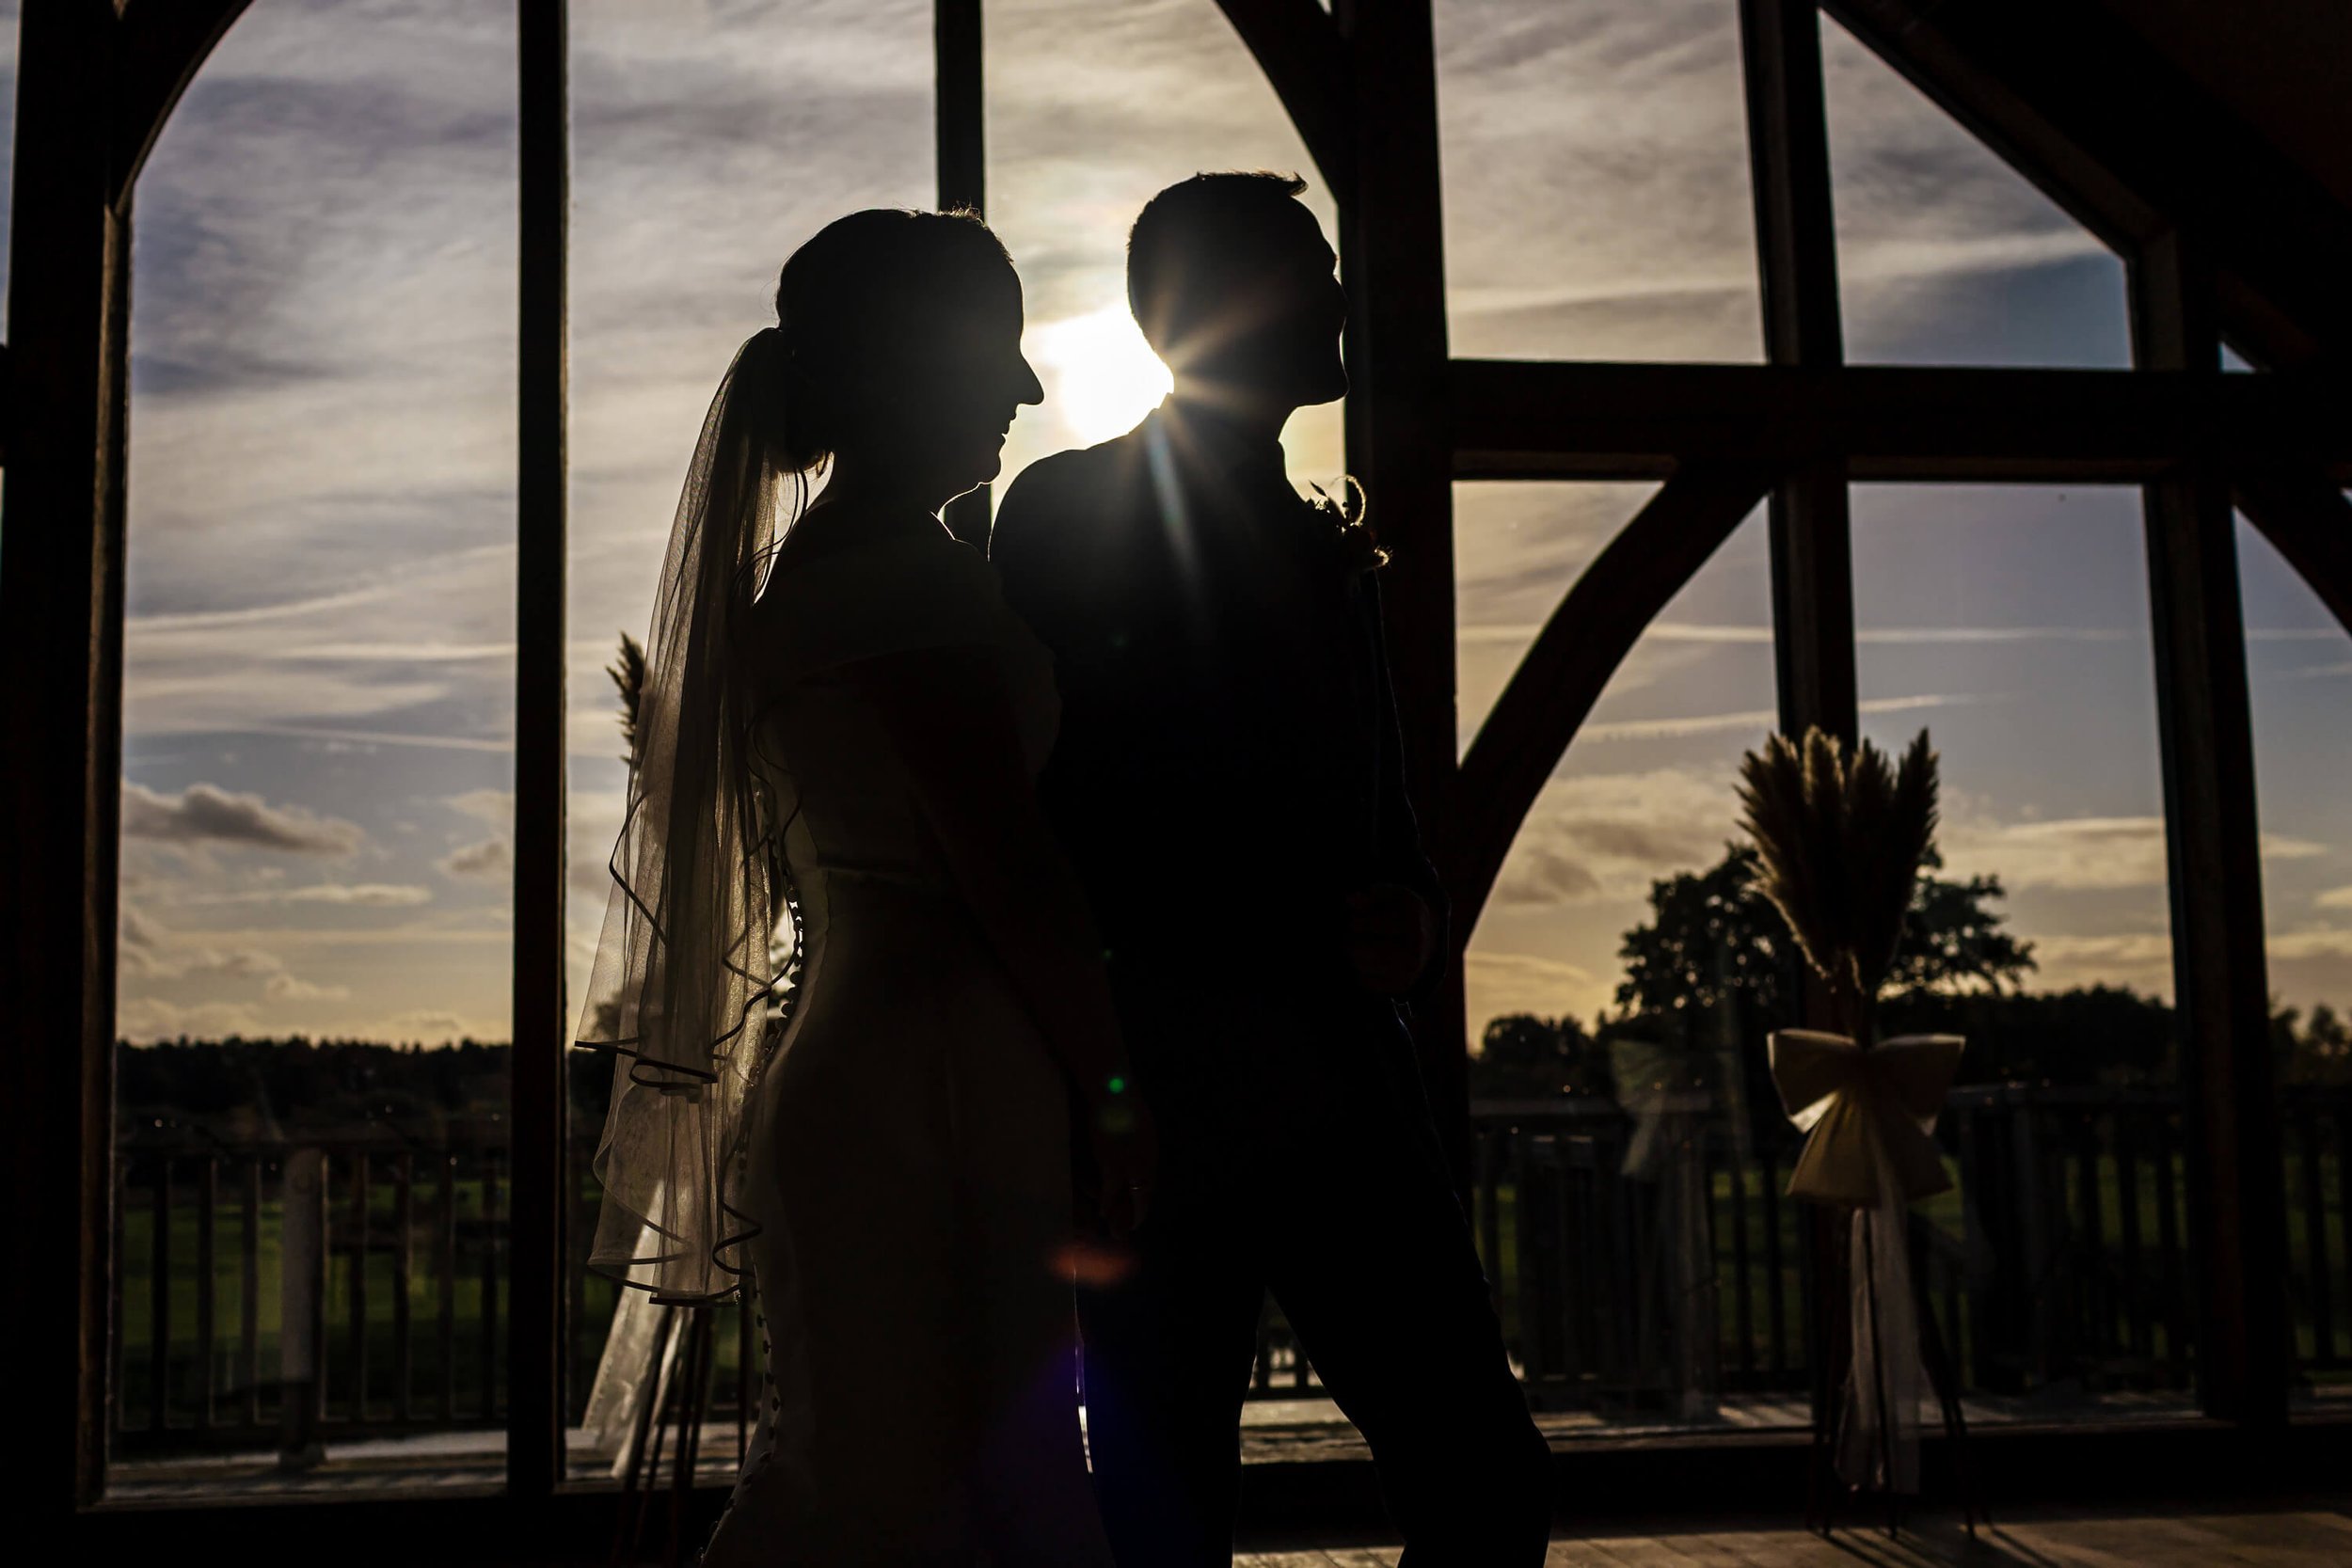 Silhouette of the bride and groom against the sunshine